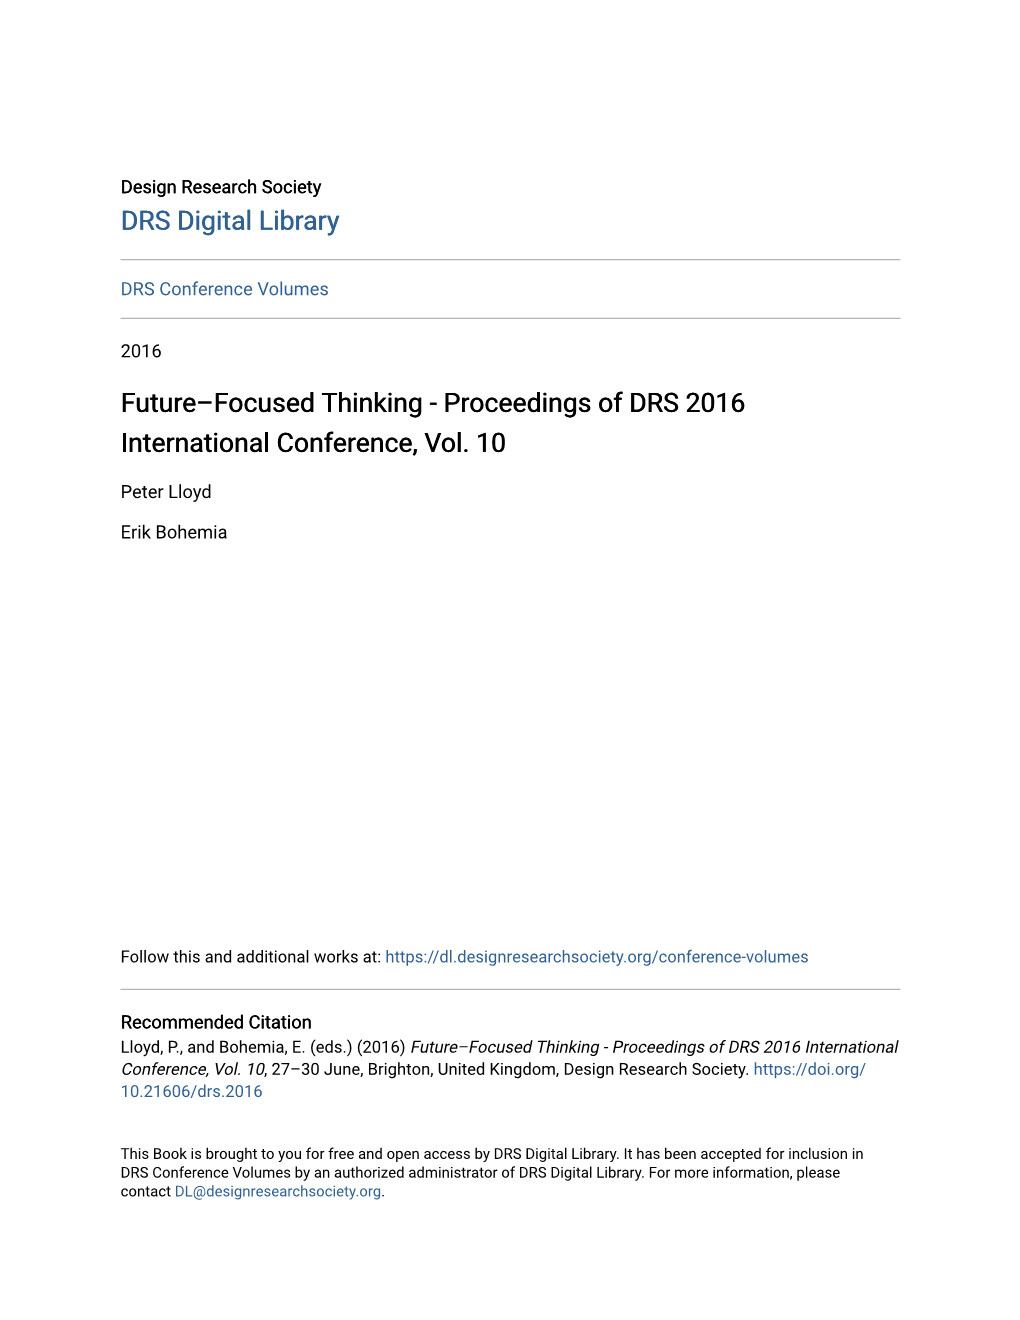 Proceedings of DRS2016 International Conference, Vol. 10